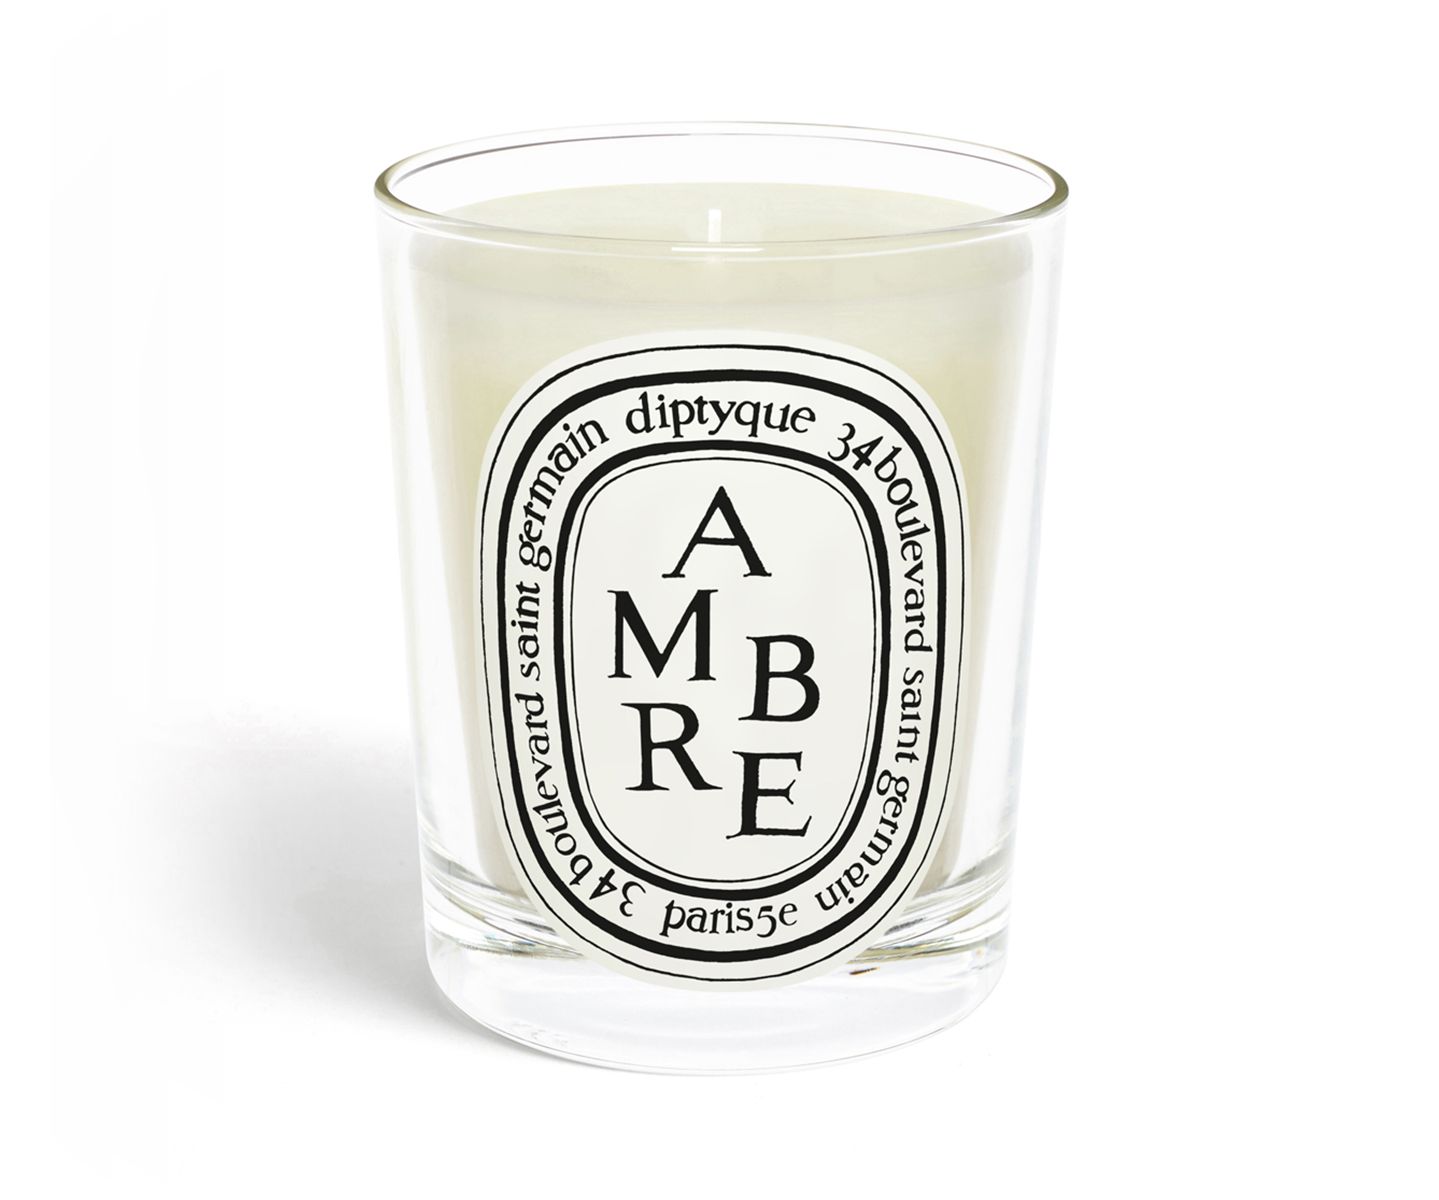 Ambre / Amber candle 1 | diptyque (US)